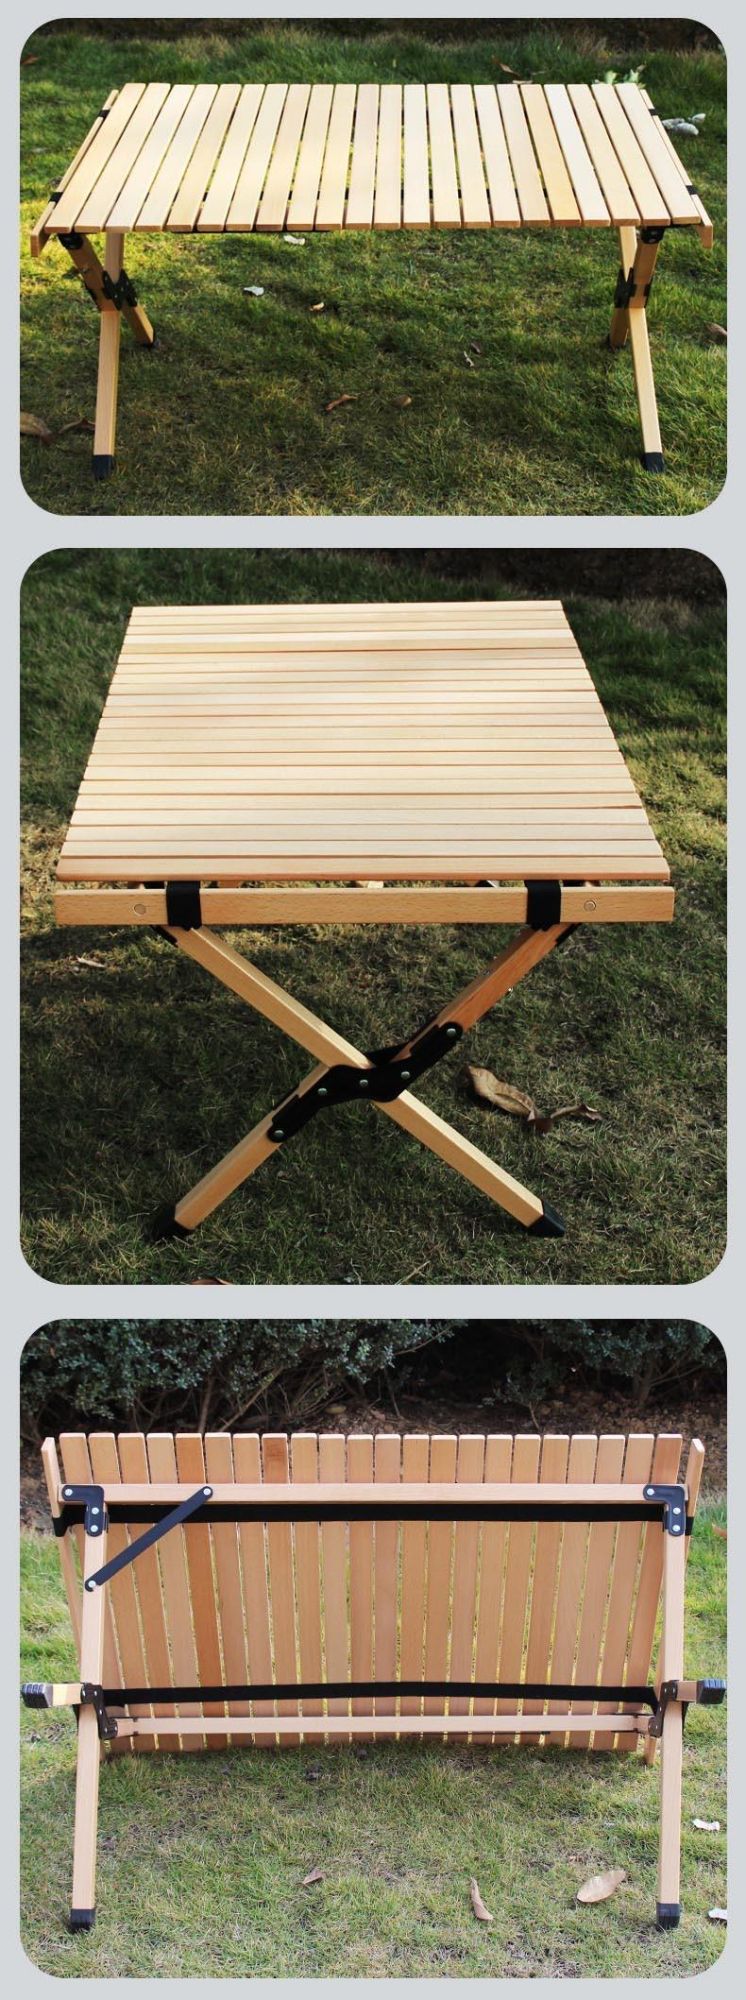 Folding Outdoor Wood Table Outdoor Camping Wood Picnic Camping Foldable Egg Roll Wood Table